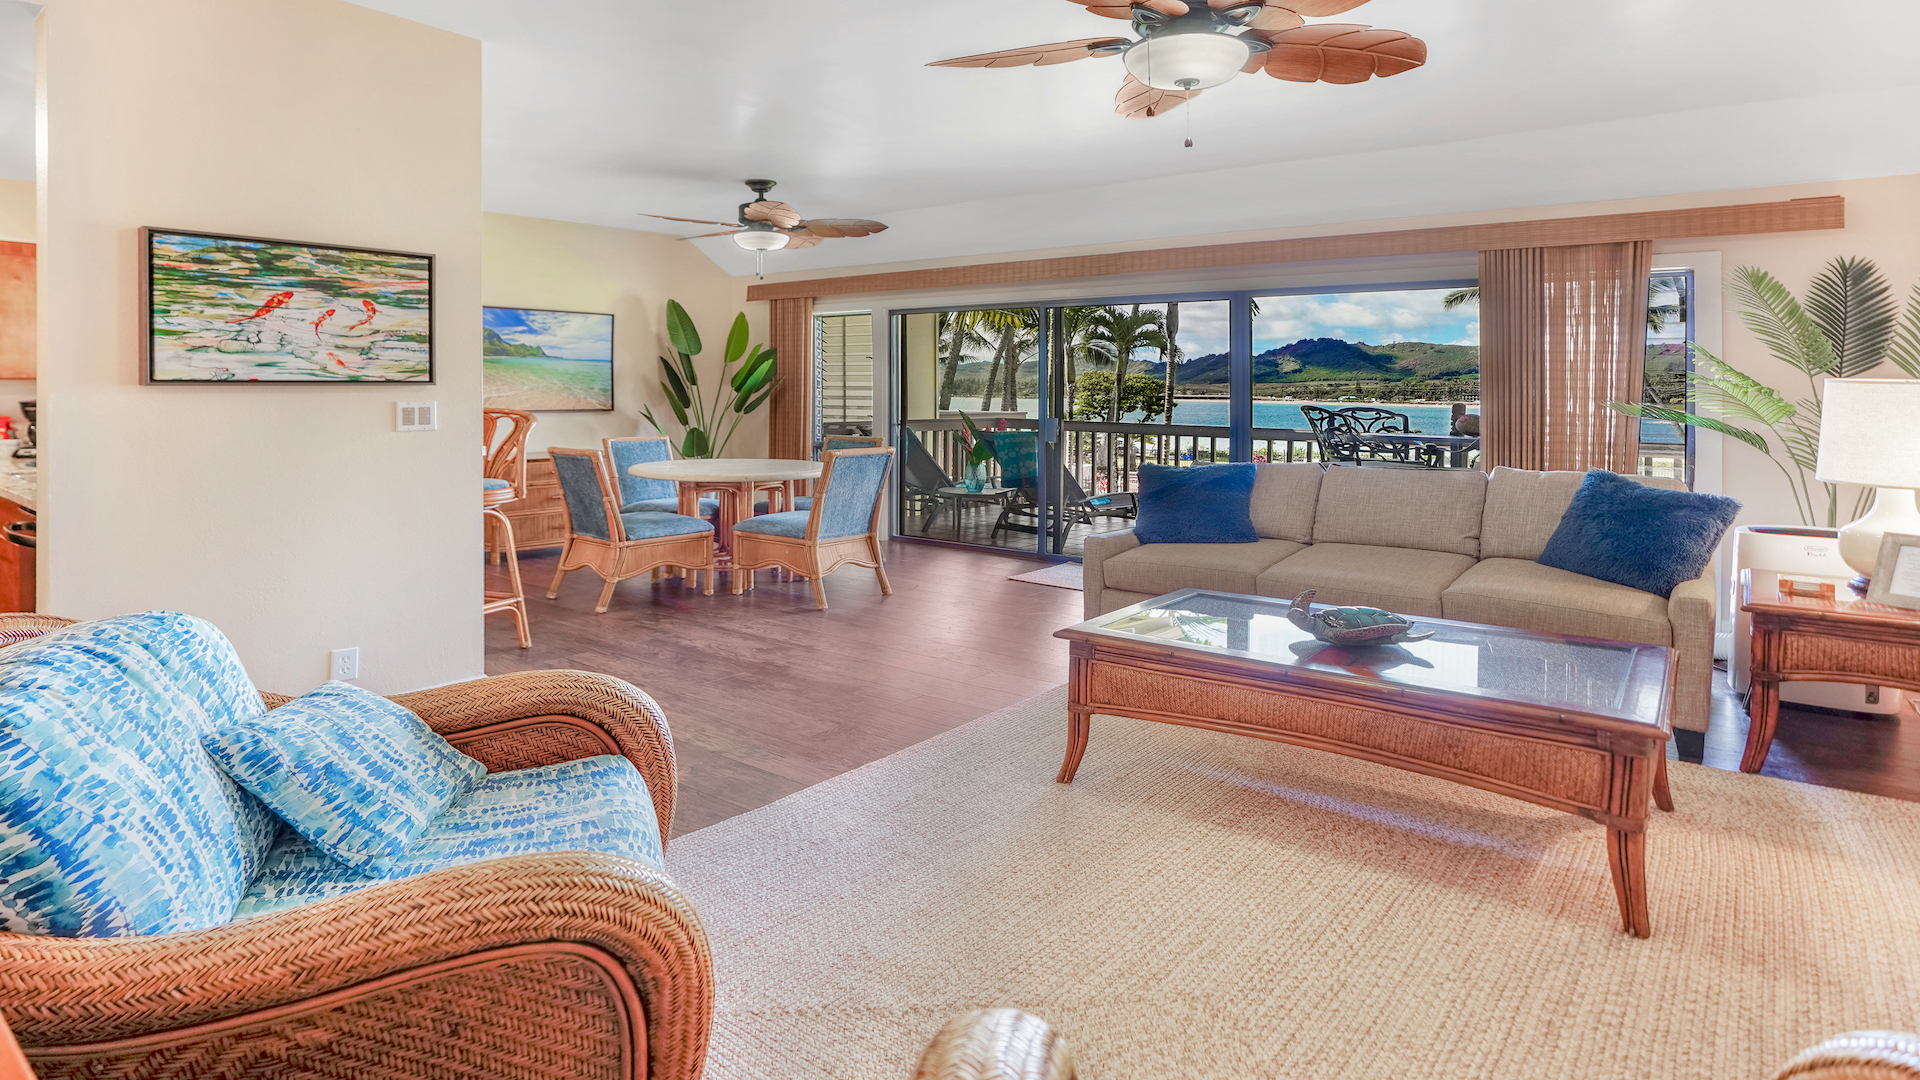 Relax and unwind in the spacious living room, where panoramic ocean views greet you at every turn.